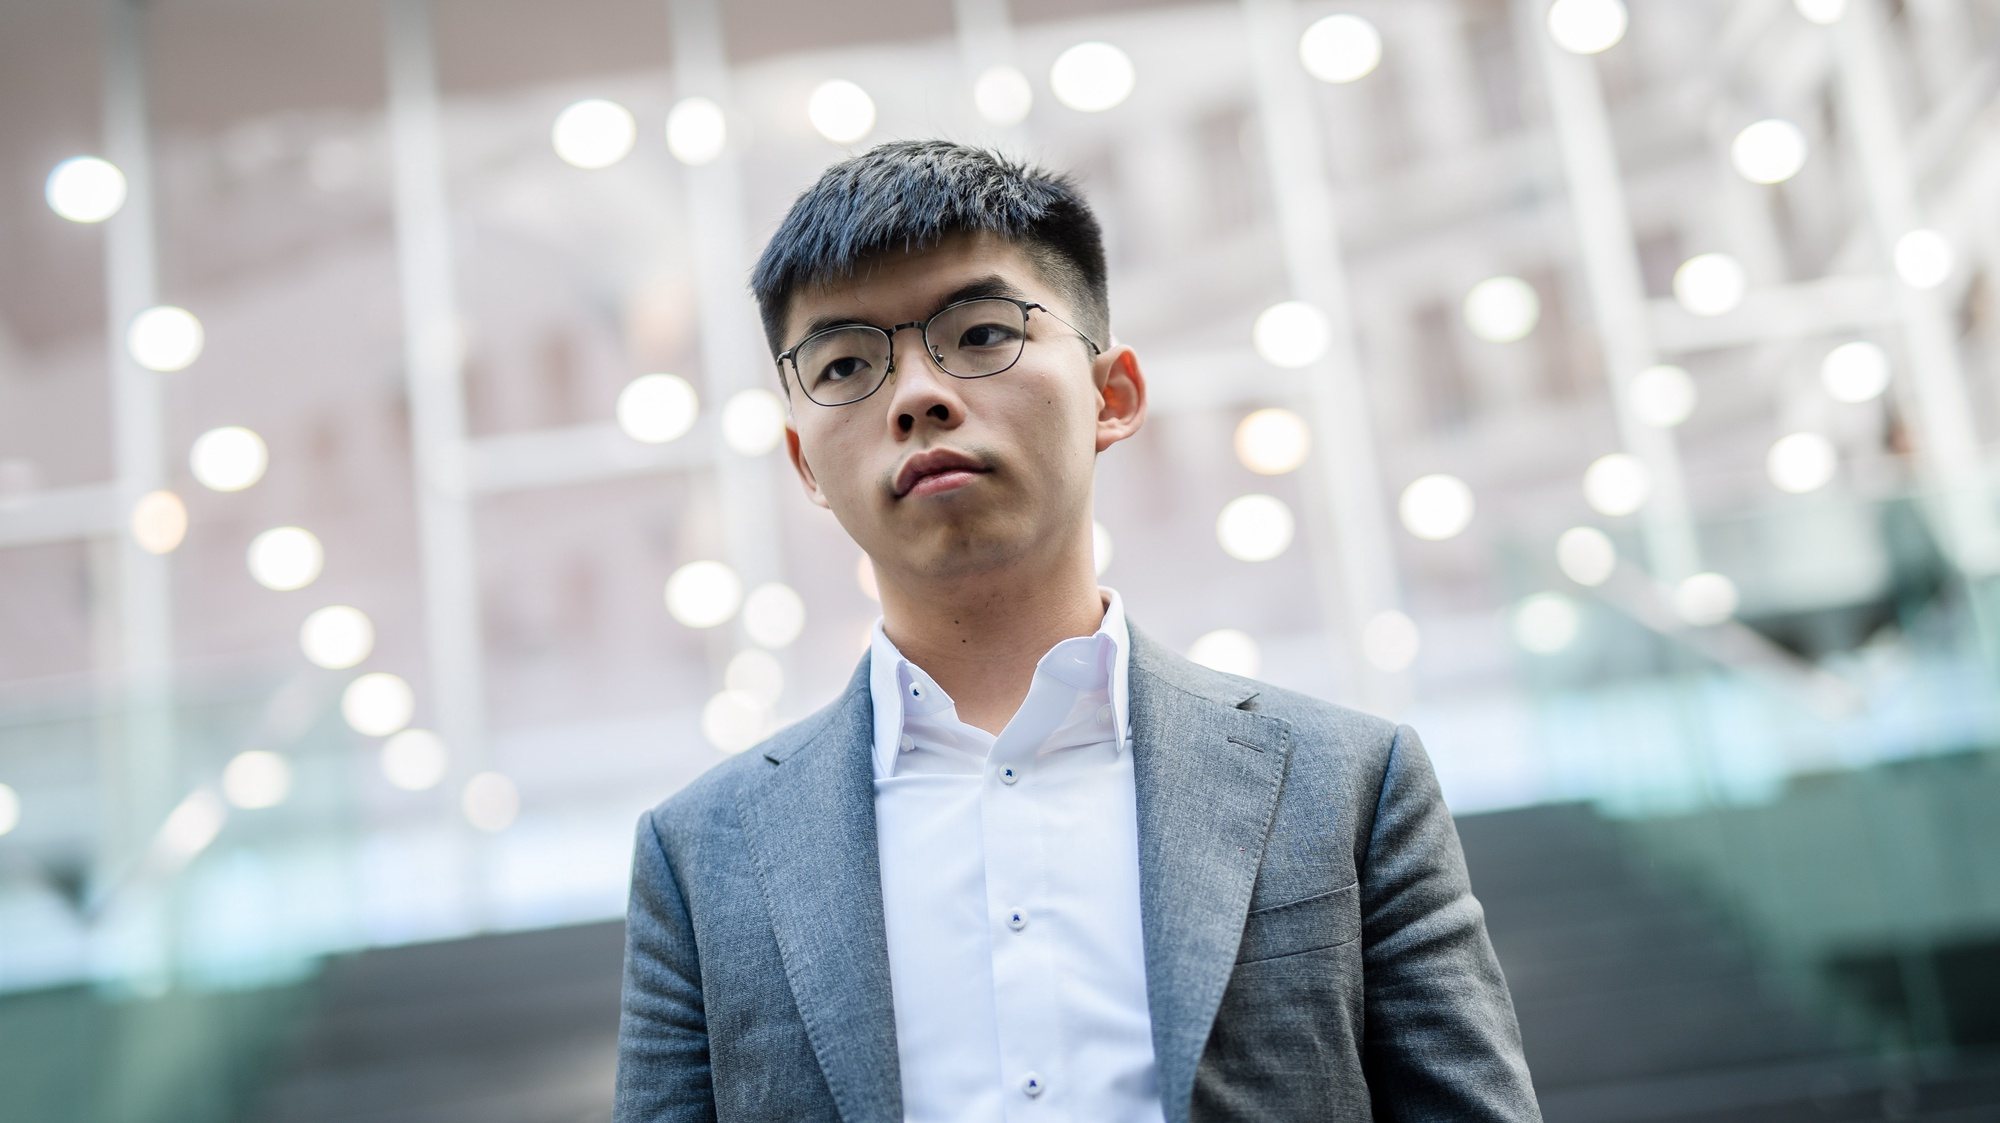 epa08692656 (FILE) - Hong Kong Demosisto party Secretary General and pro-democracy activist Joshua Wong poses for media after a press conference at the Federal Press Conference (Bundespressekonferenz) in Berlin, Germany, 11 September 2019 (reissued 24 September 2020). According to media reports, Wong was arrented on 24 September 2020 while reporting to Central Police Station in Hong Kong, on charges of participating in an unlawful assembly on 05 October 2019, as well as violating the anti-mask law.  EPA/CLEMENS BILAN